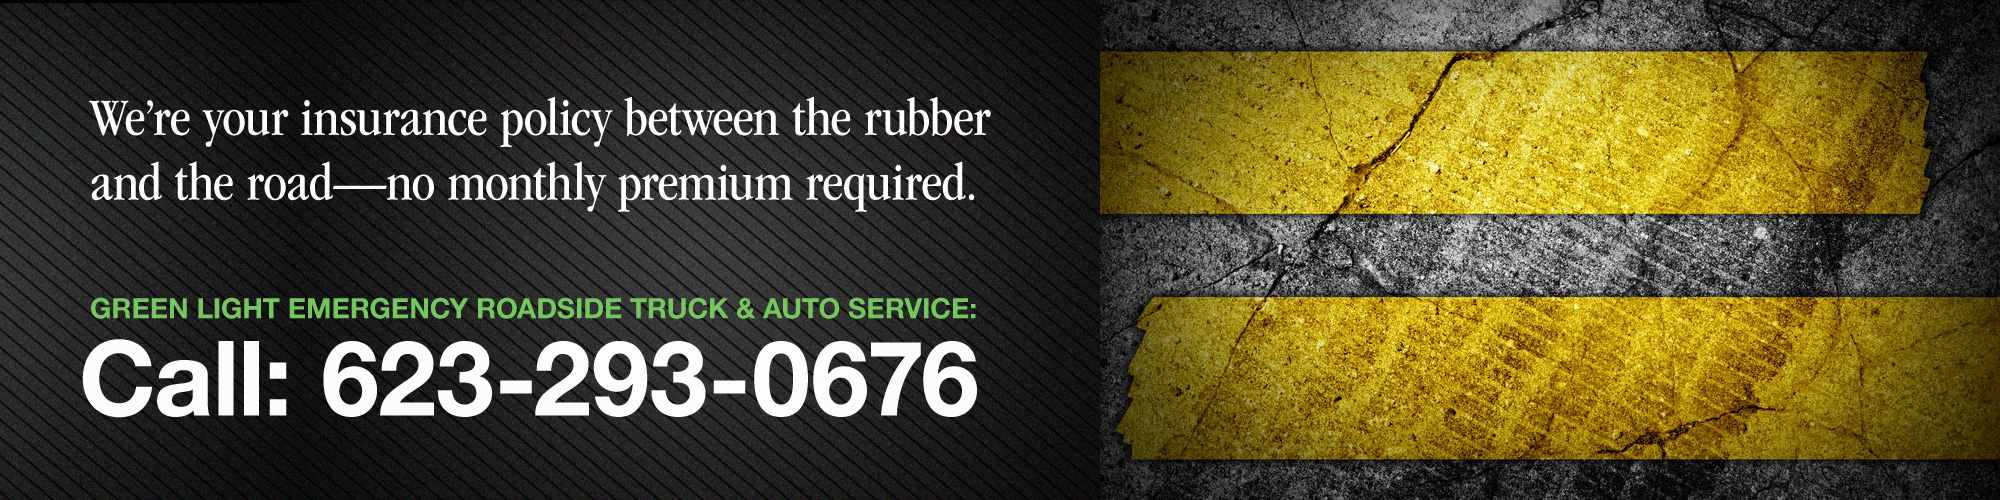 We're your insurance policy between the rubber and the road. No monthly premium required.